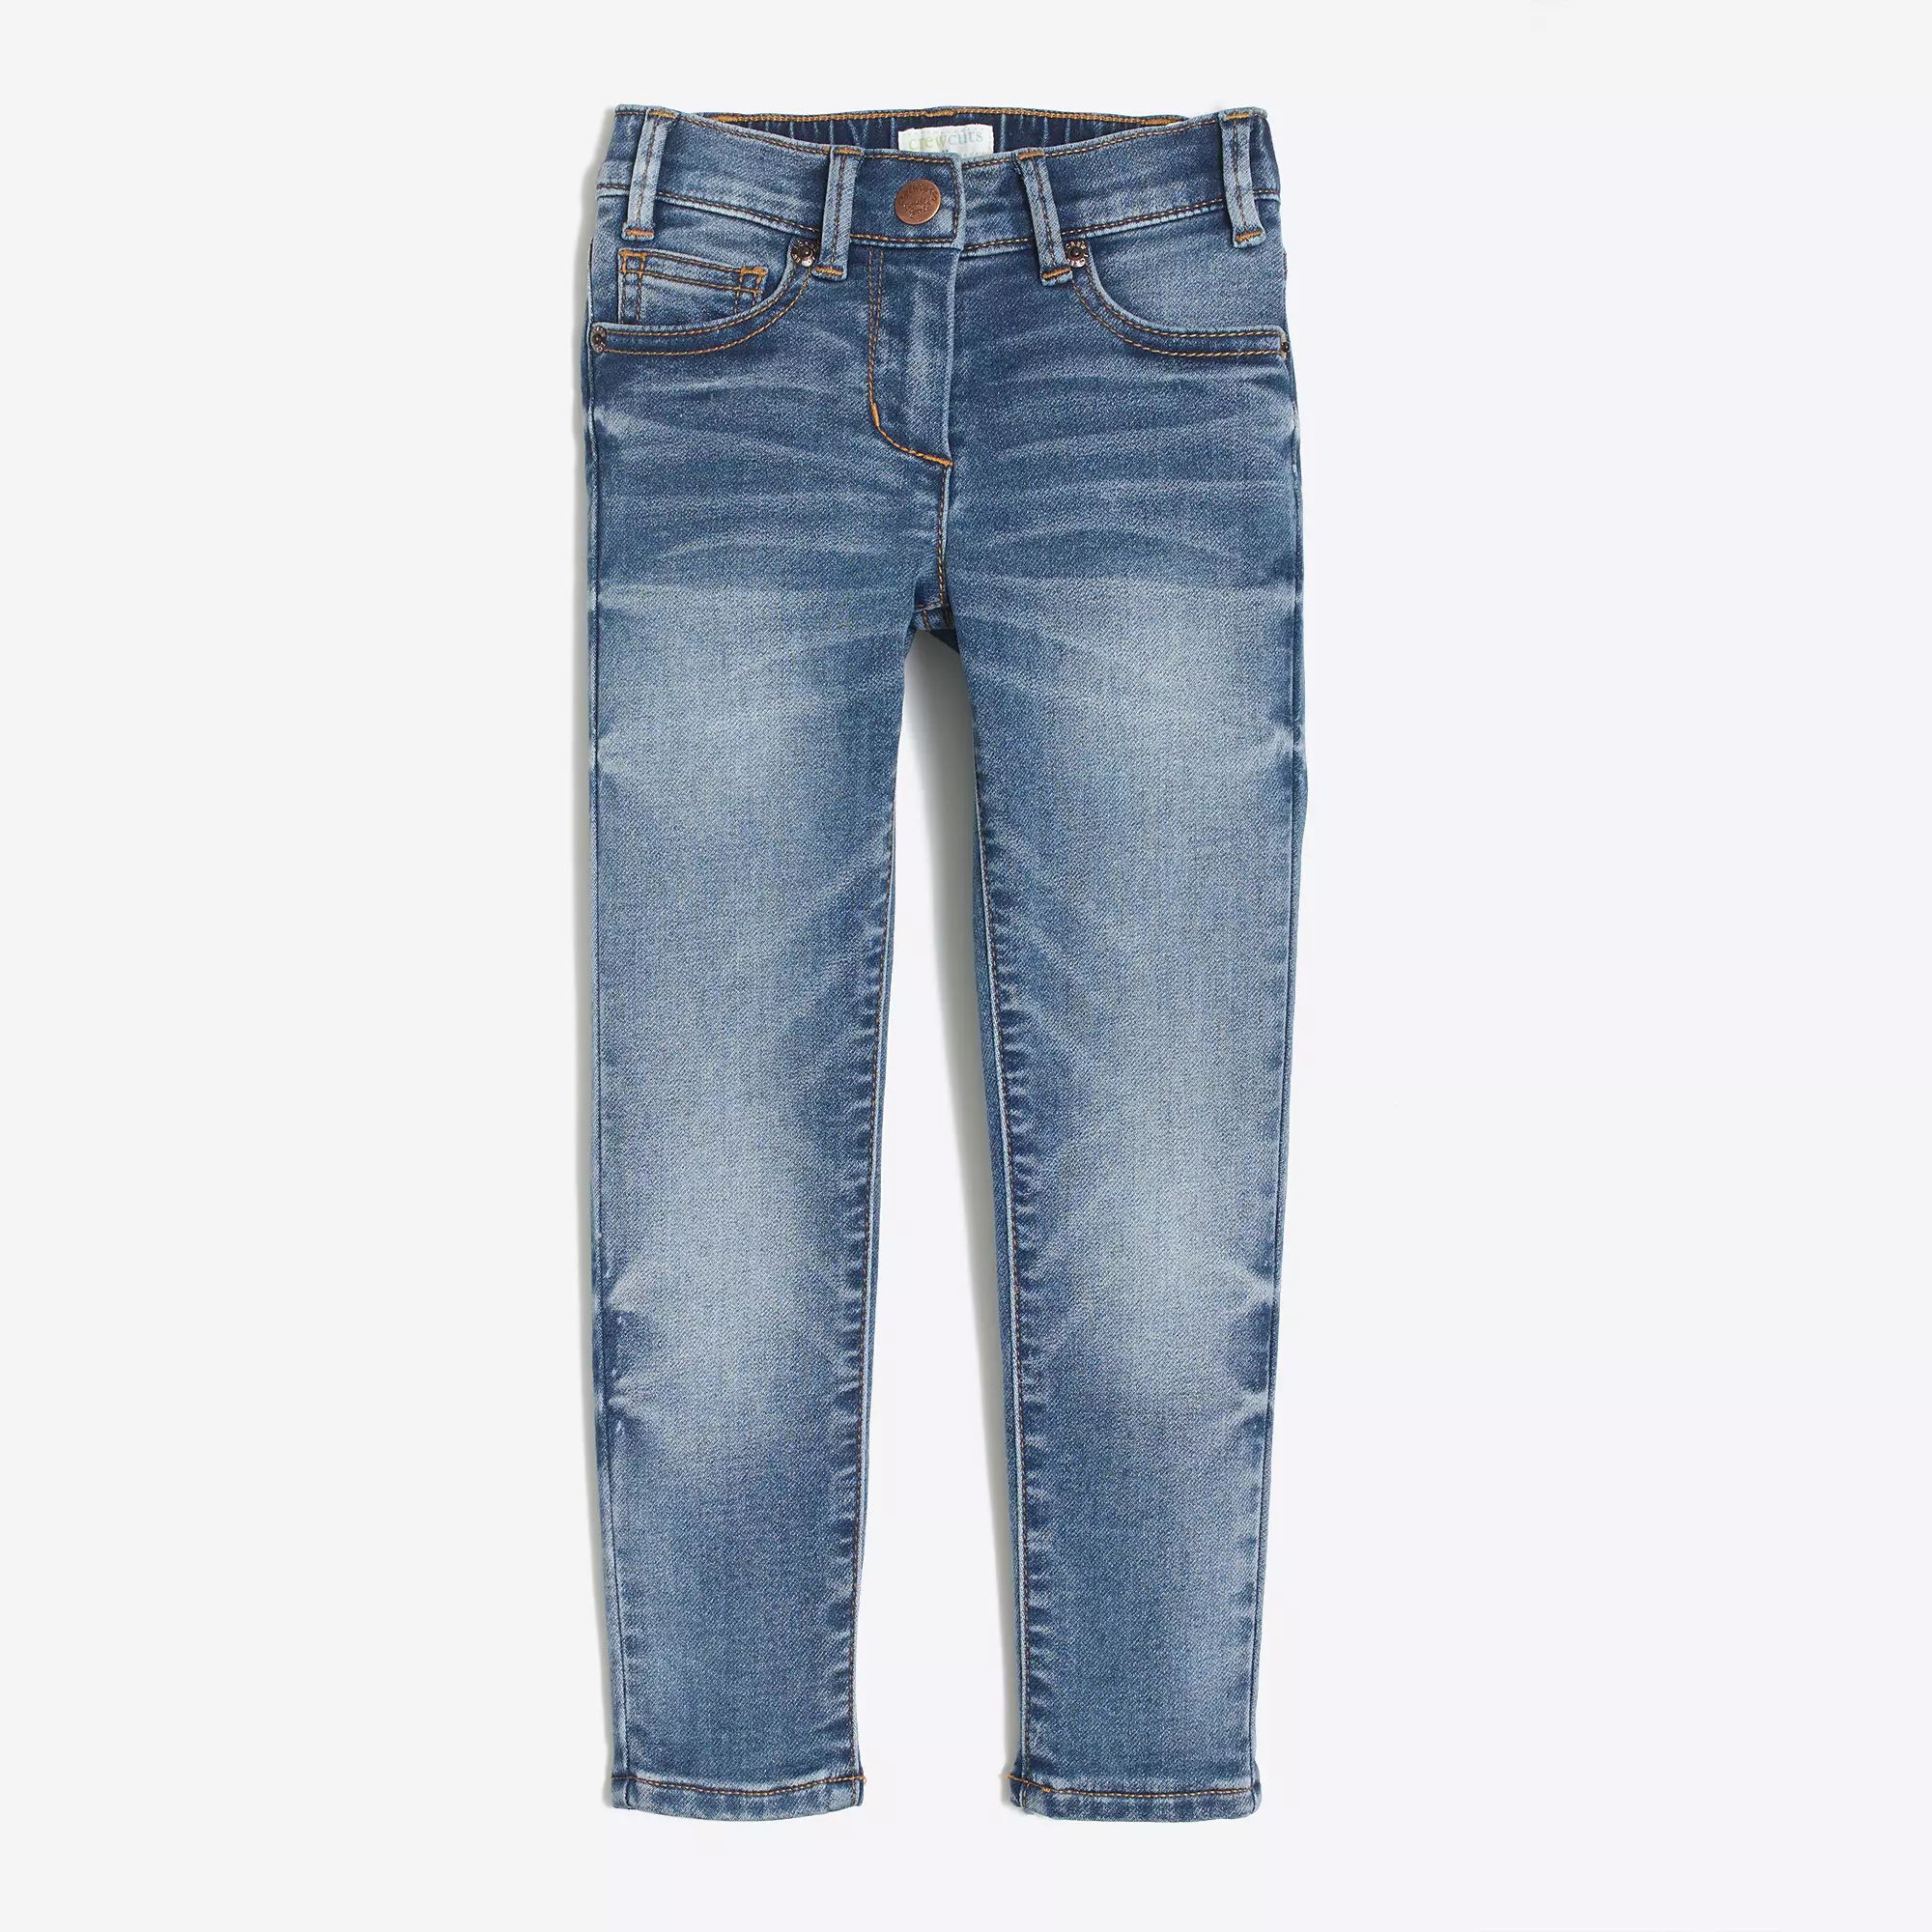 Girls' anywhere jean in selby wash | J.Crew Factory